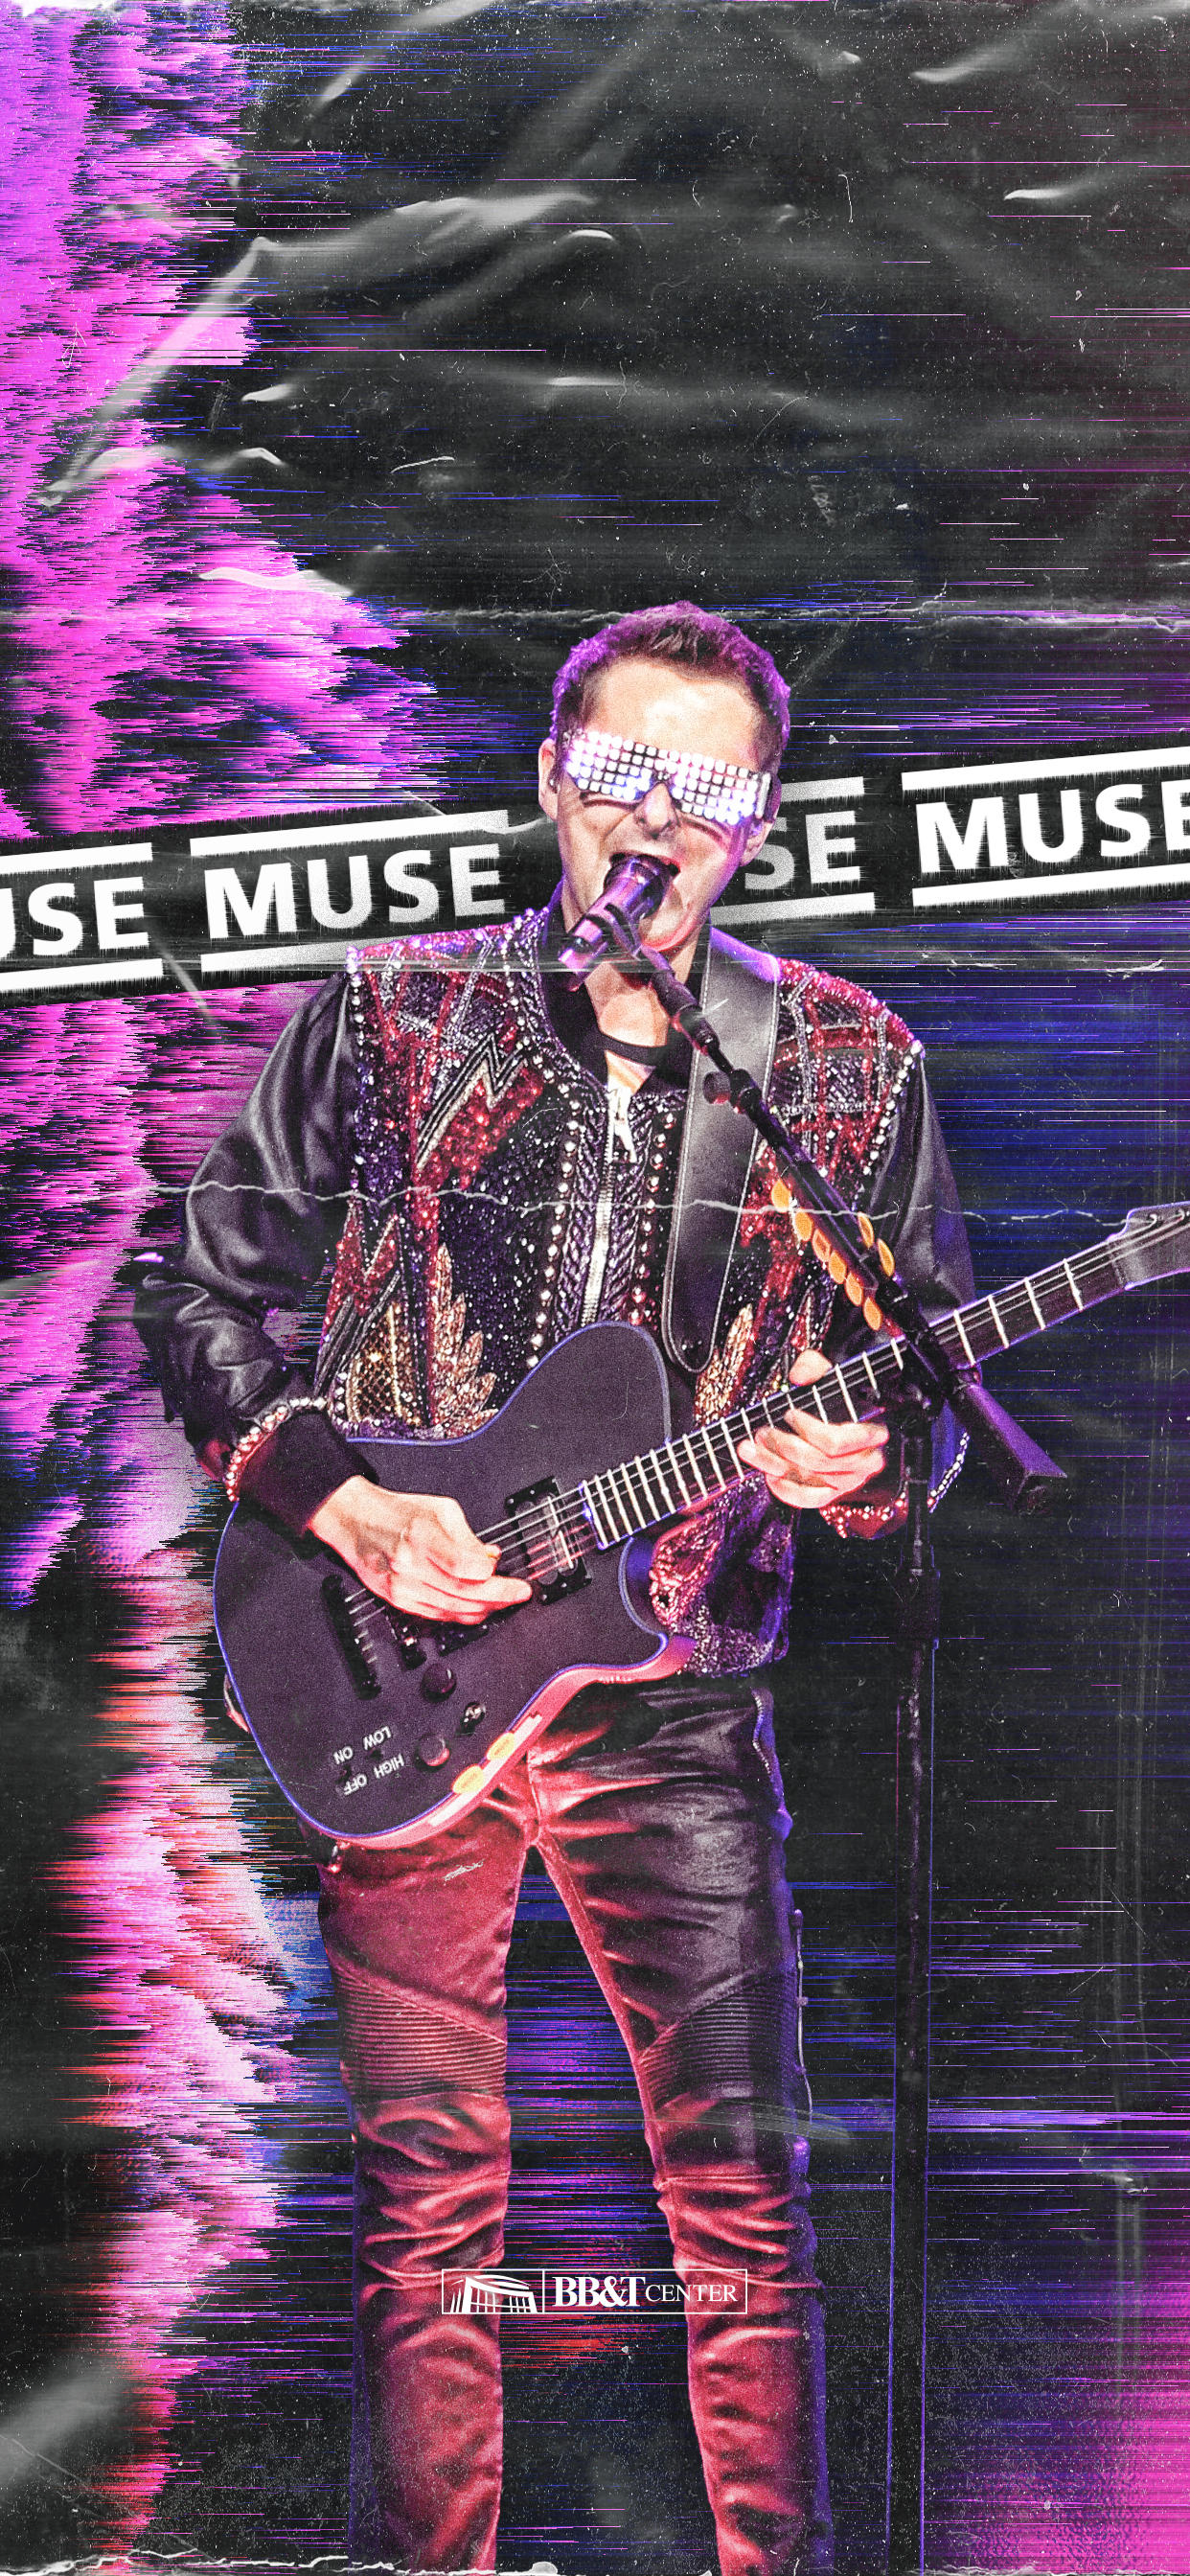 Ww Muse1 - Muse , HD Wallpaper & Backgrounds